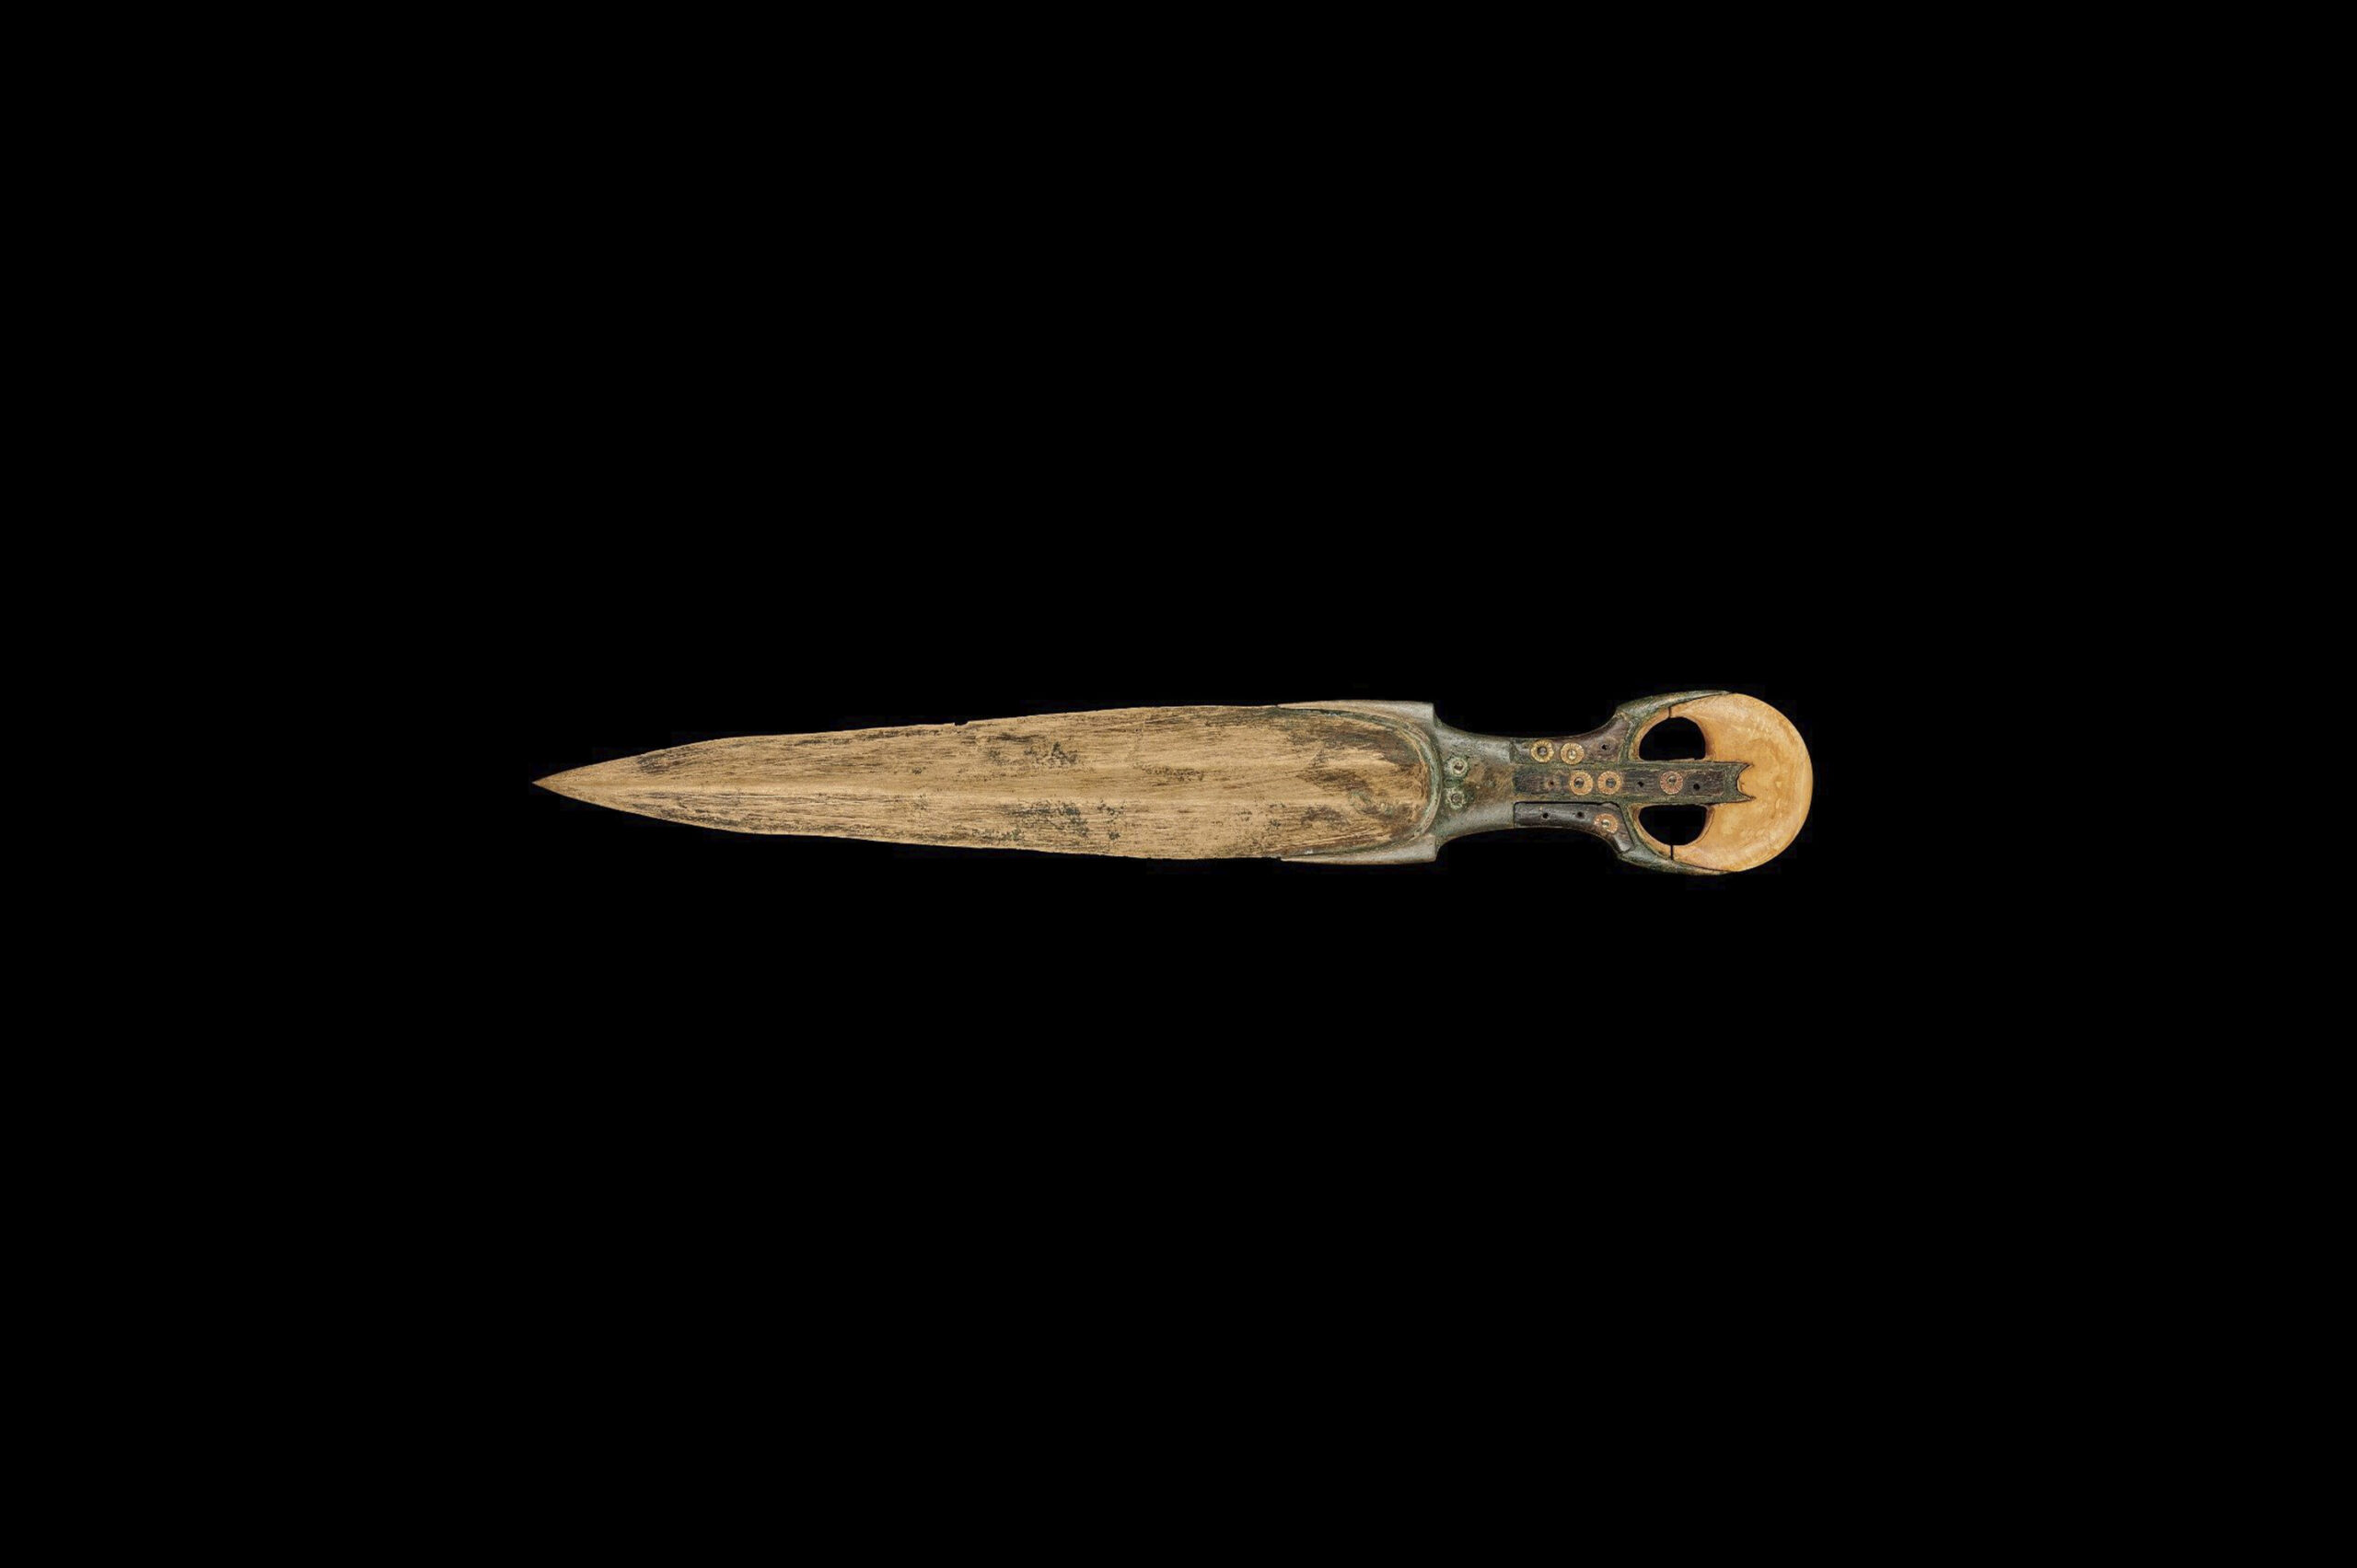 LARGE BRONZE DAGGER WITH IVORY AND GILT ROSETTES, EGYPTIAN, CA, 1786-1590 B.C